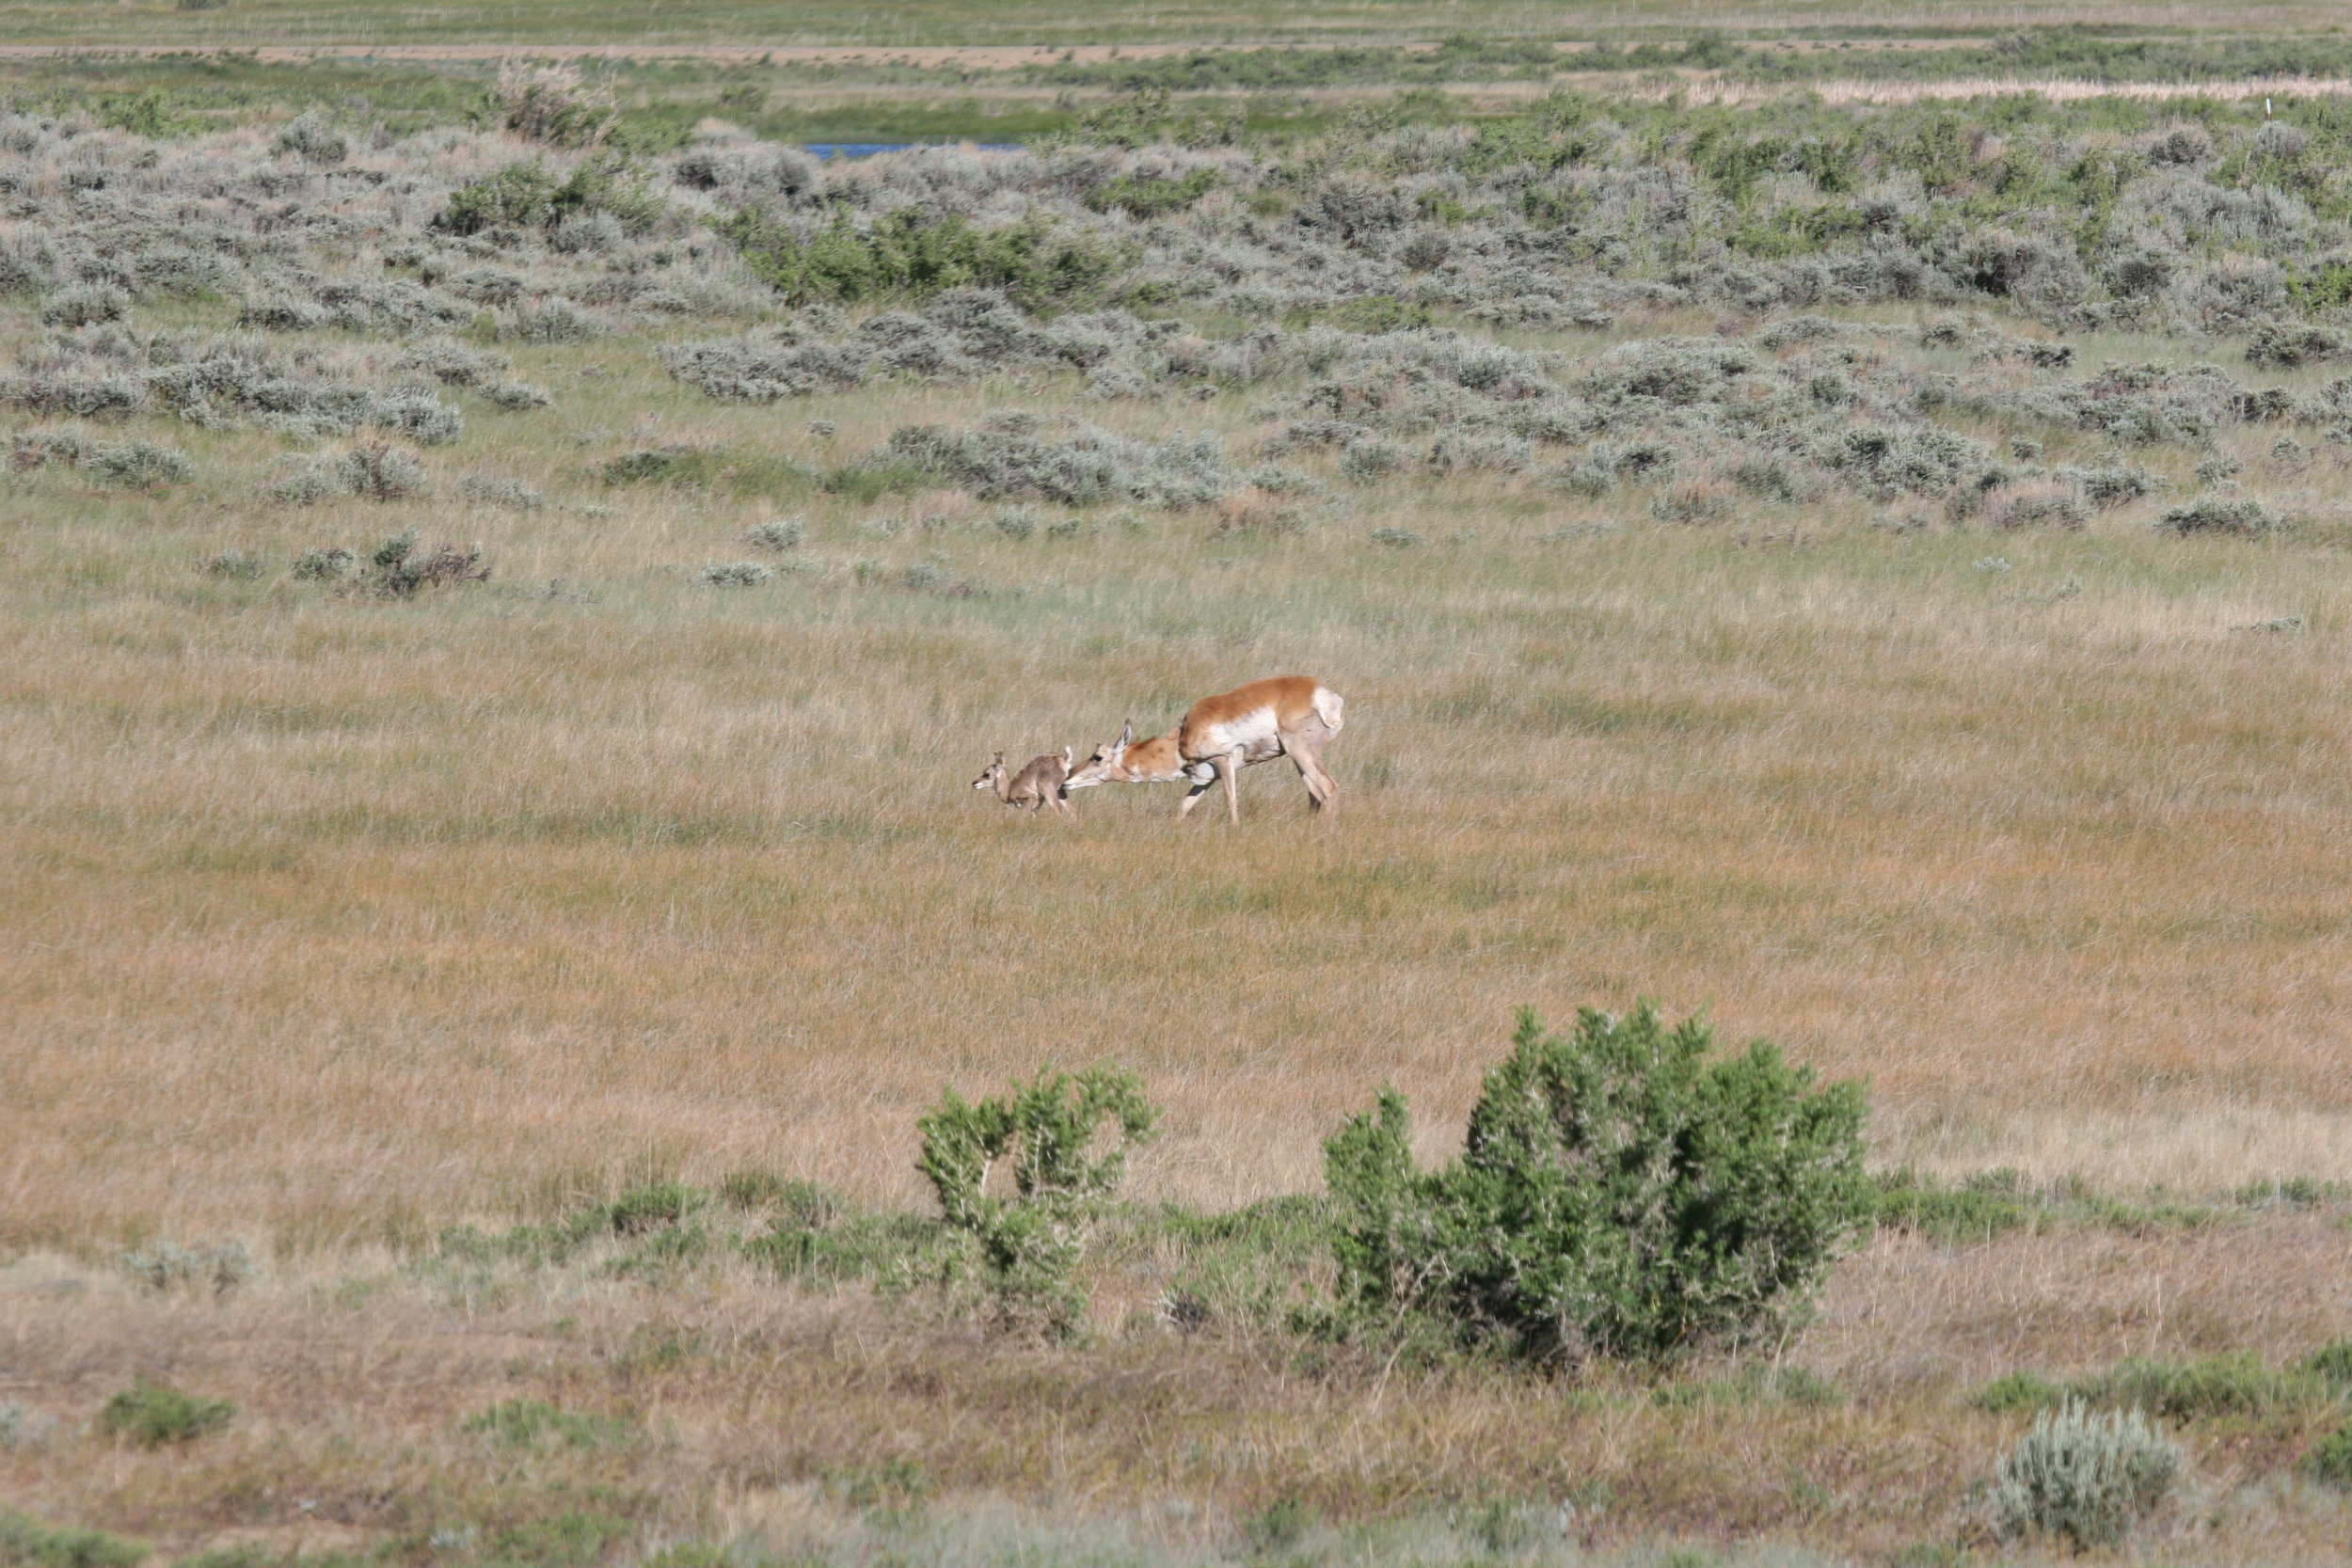  Prairie dogs will sometimes (though infrequently) give false alarms at animals that are not predators before the prairie dog can determine what the animal is. Here another prey animal, the pronghorn, shows its own vulnerability.  ©John Hoogland 2006